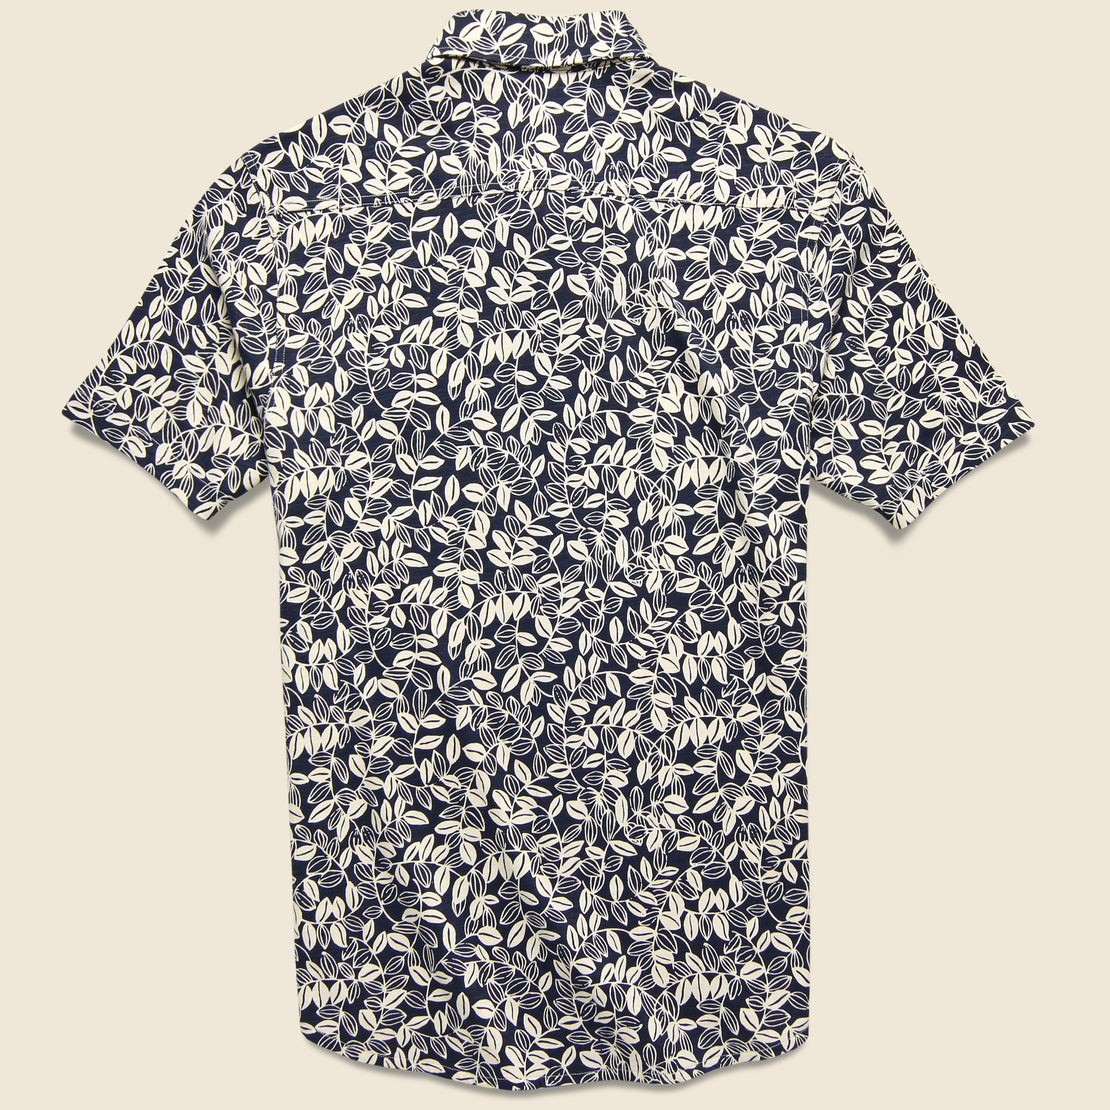 Knit Seasons Shirt - Navy Avallinas Print - Faherty - STAG Provisions - Tops - S/S Woven - Floral